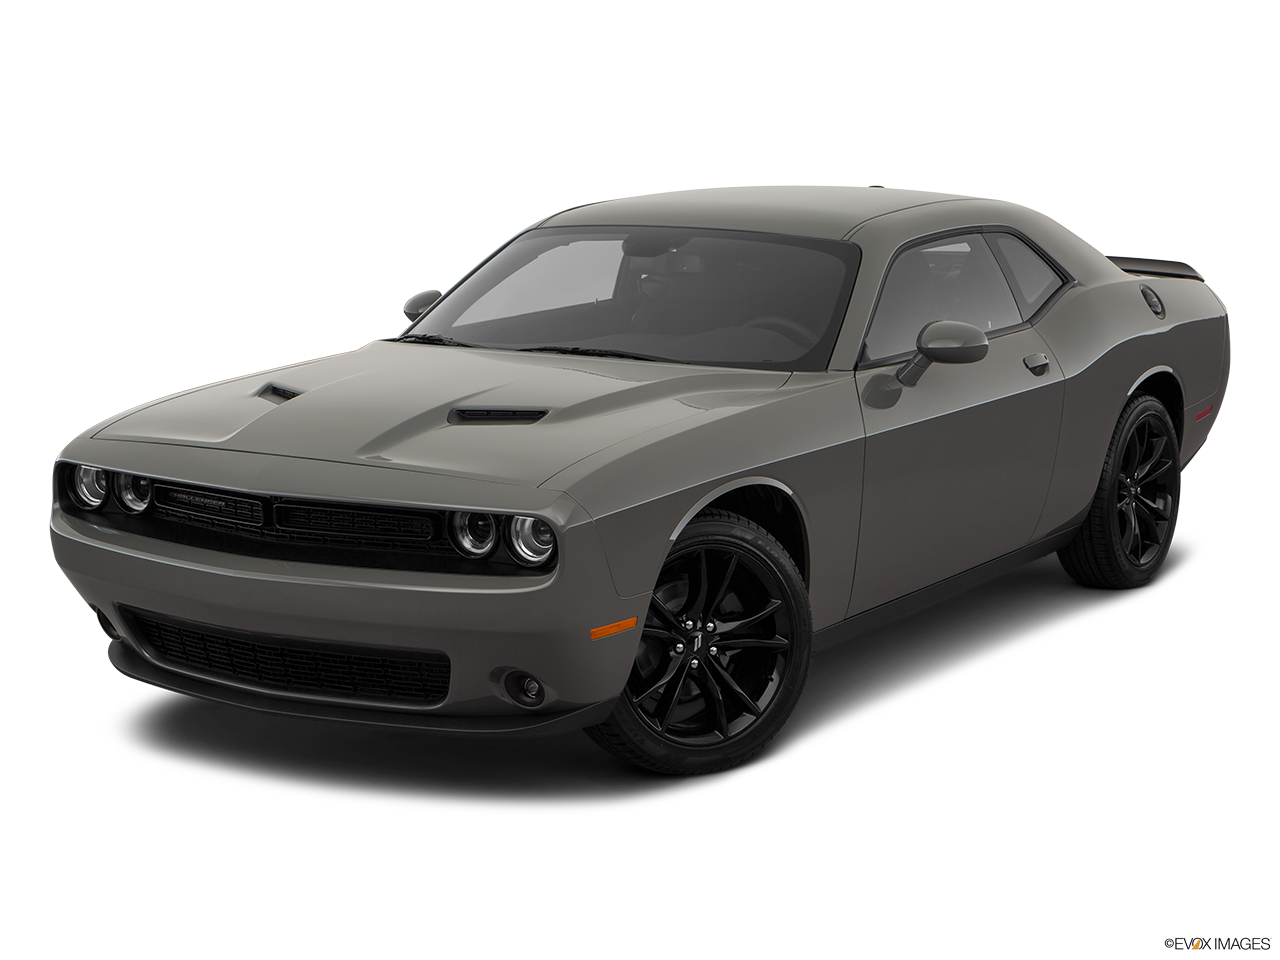 Dodge Challenger: Which Should You Buy, 2021 or 2022?